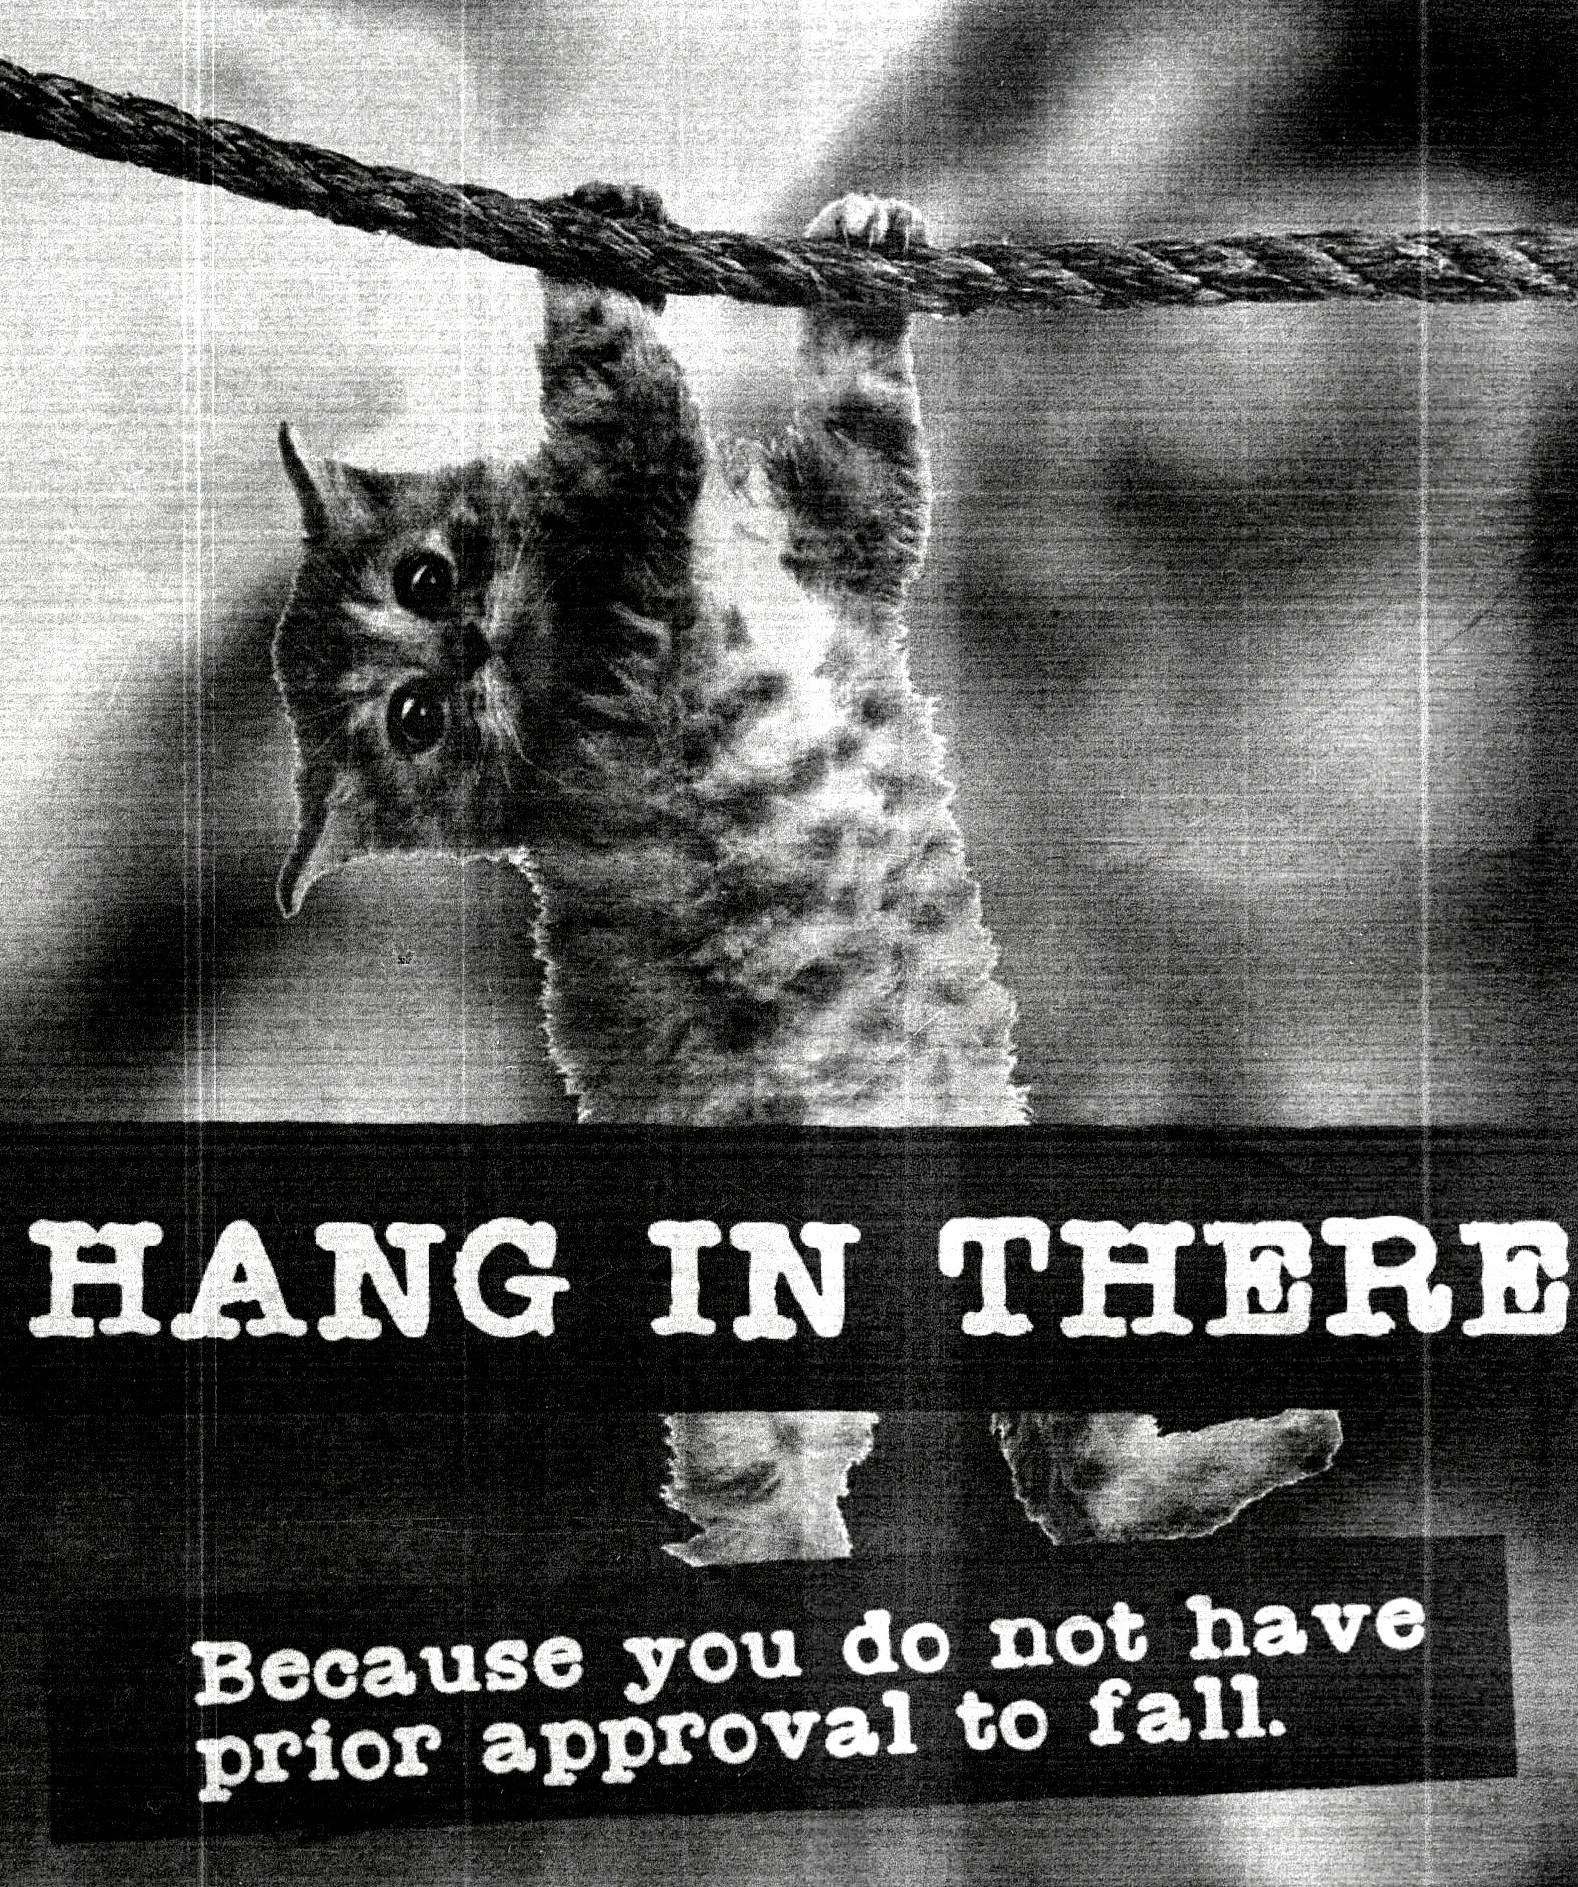 A cat hanging from a rope. The text says, "Hang in there-- because you do not have prior approval to fall."